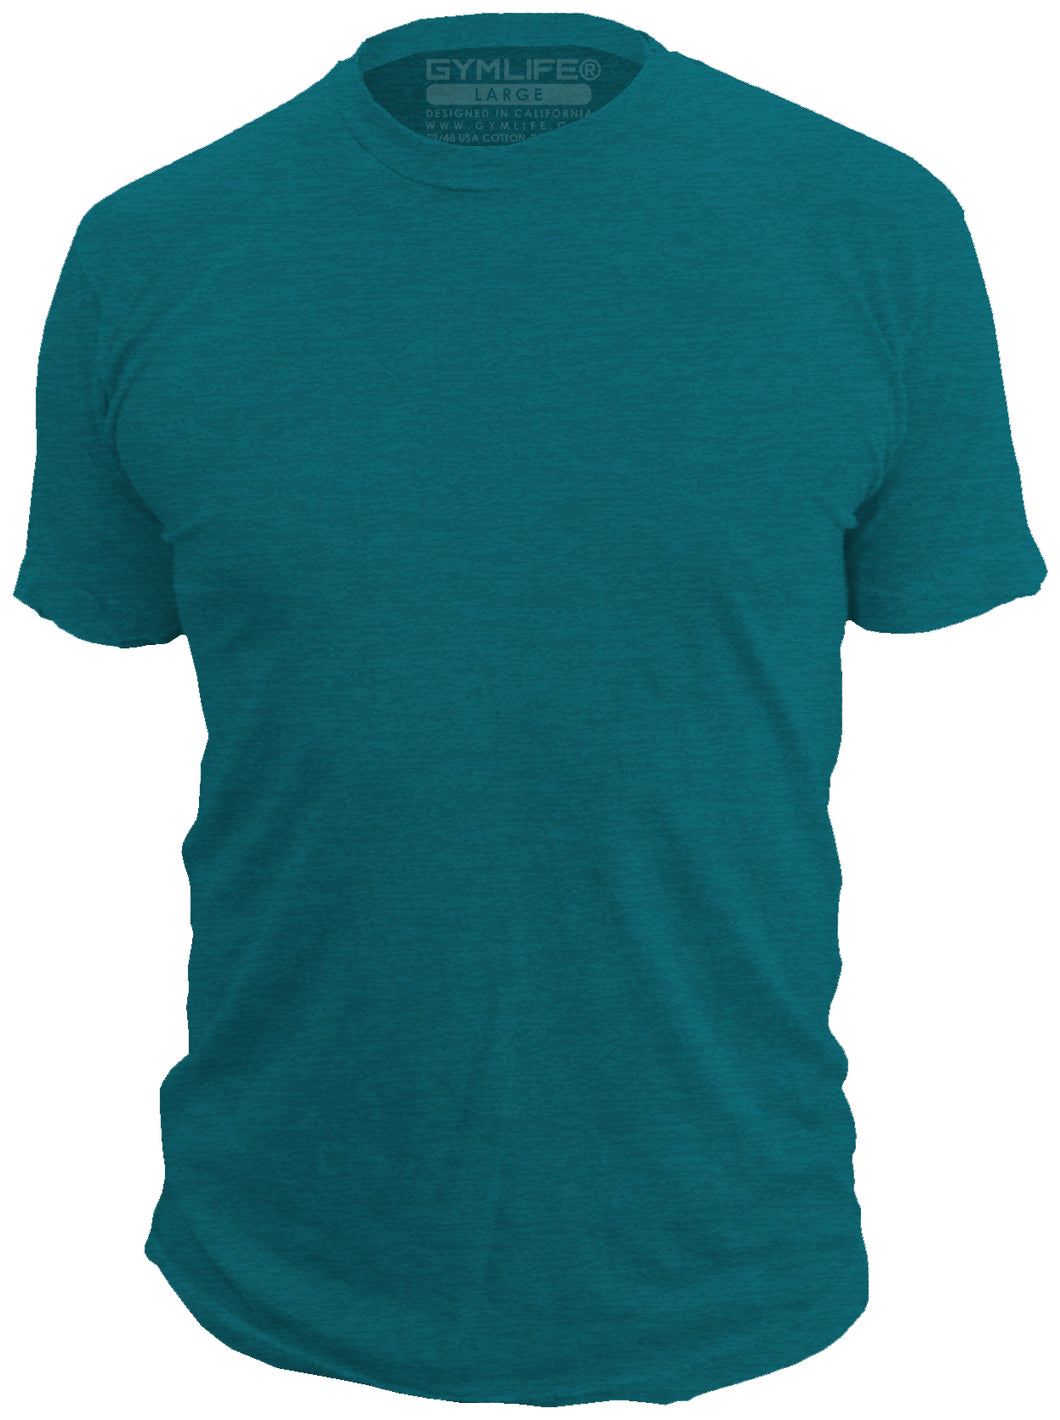 GYM LIFE - BLANK - Mens Athletic 52/48 Premium T-Shirt, Made of USA, Ocean Blue Heather